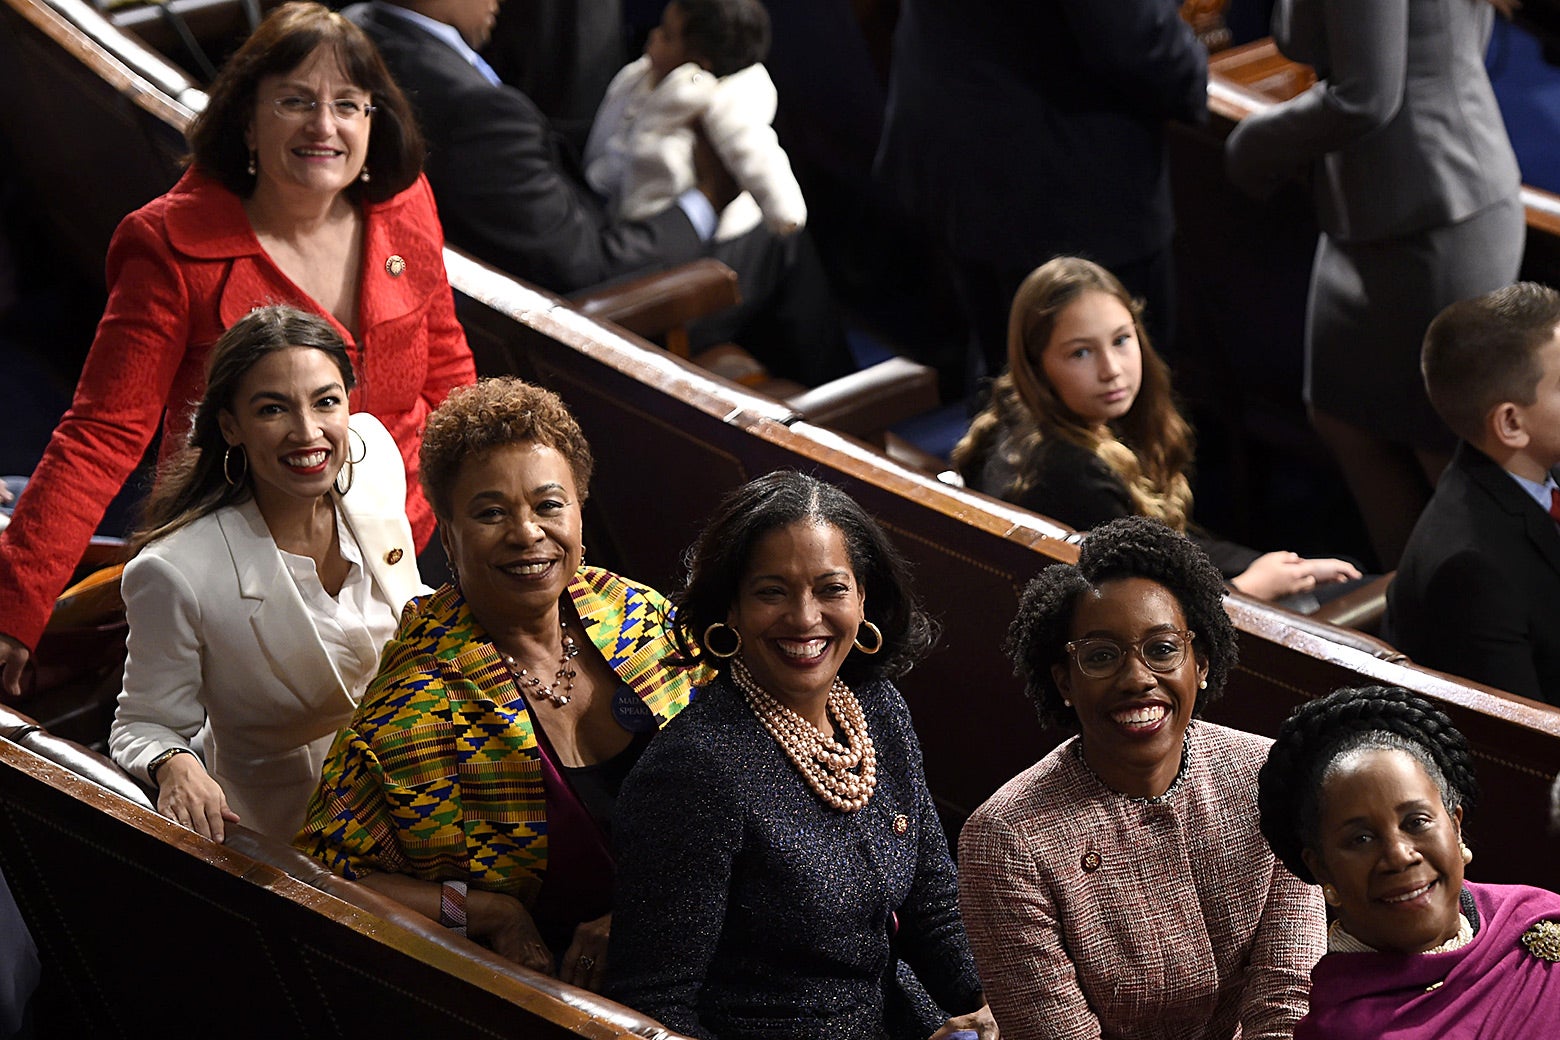 Second from left: Reps. Alexandria Ocasio-Cortez, Barbara Lee, Jahana Hayes, Lauren Underwood, and Sheila Jackson-Lee sit for a photograph on the House Chamber during the opening session of the 116th Congress on Jan. 3. A sixth women, smiling and standing to the left of Ocasio-Cortez, is unidentified in the photo.